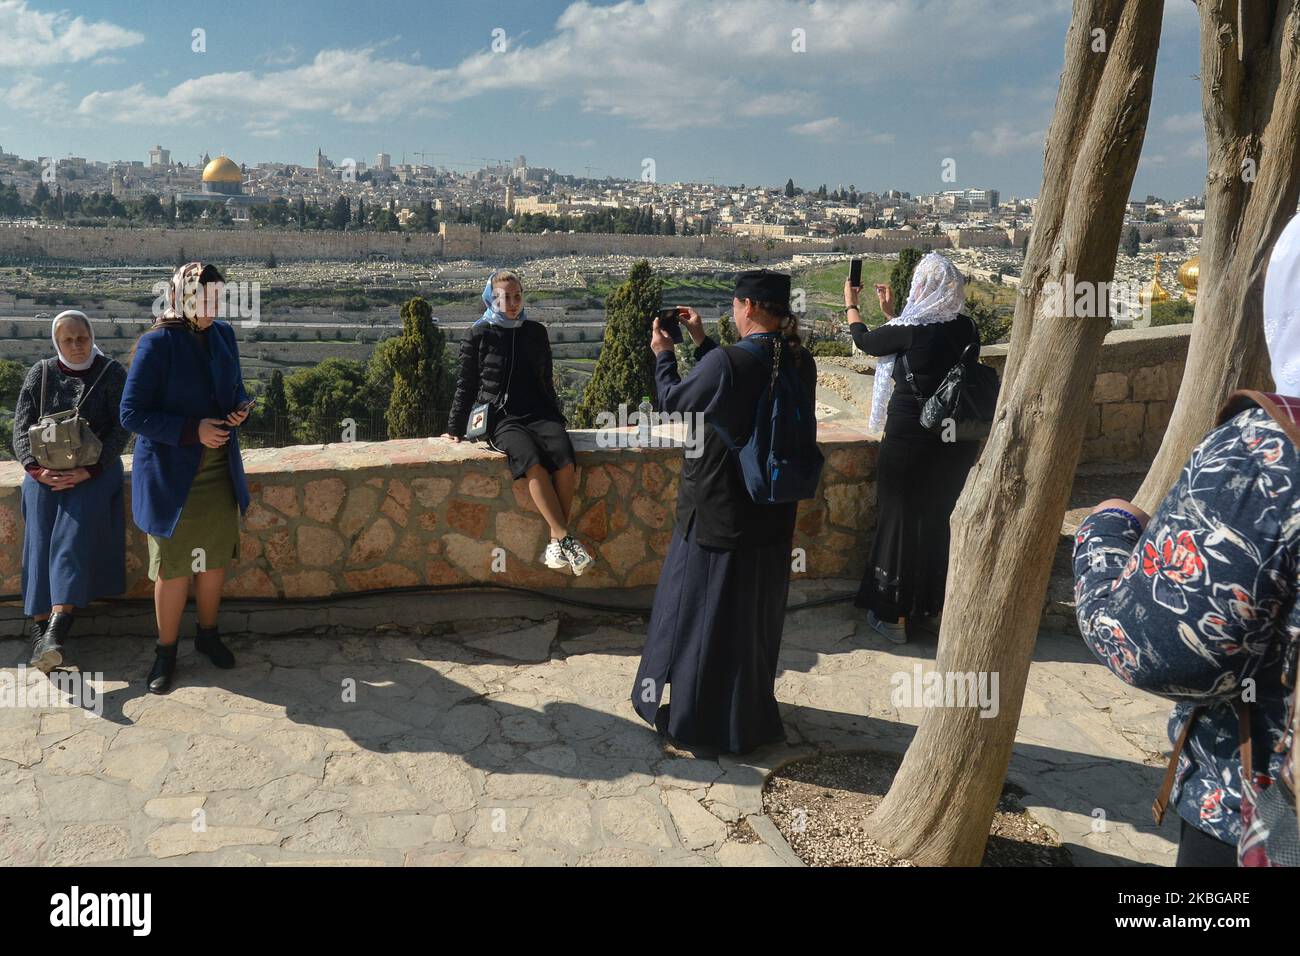 Pilgrims take pictures with a view of the Old City of Jerusalem with its Dome of the Rock mosque in the centre, seen from the Mount of Olives. On Wednesday, February 5, 2020, in Jerusalem, Israel. (Photo by Artur Widak/NurPhoto) Stock Photo